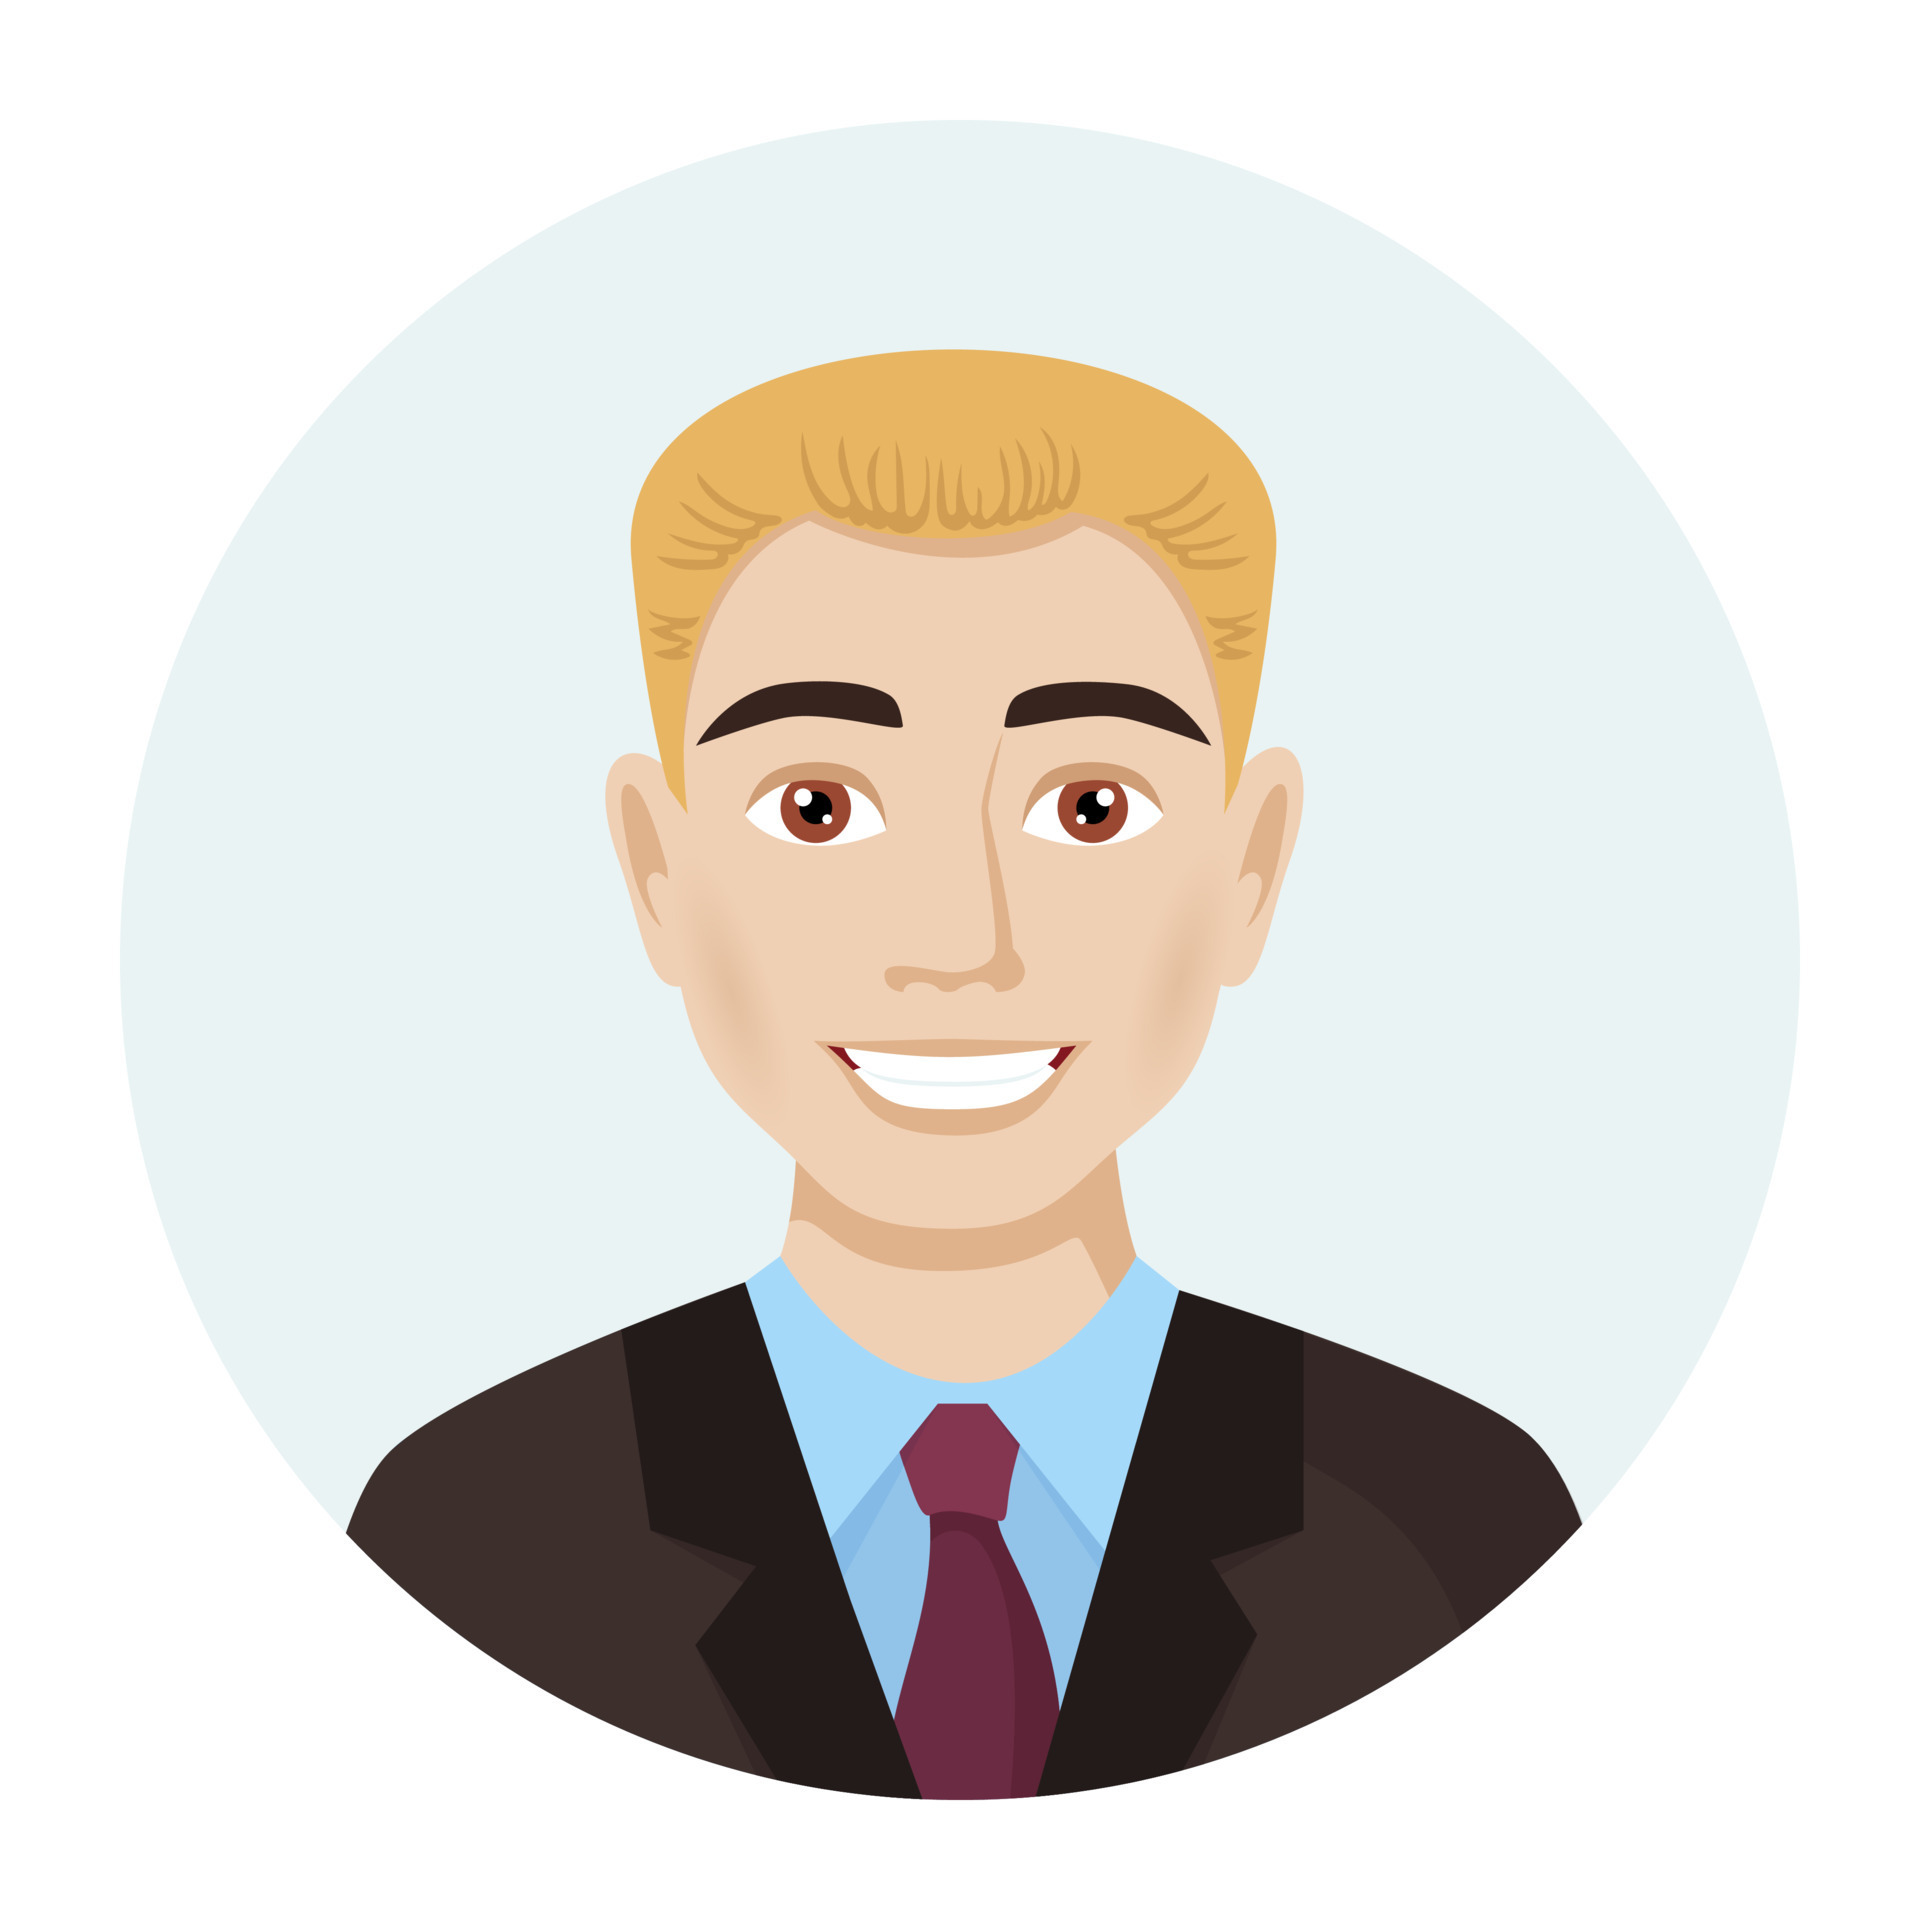 male-avatar-portrait-of-a-business-man-in-a-suit-illustration-of-male-character-in-modern-color-style-vector